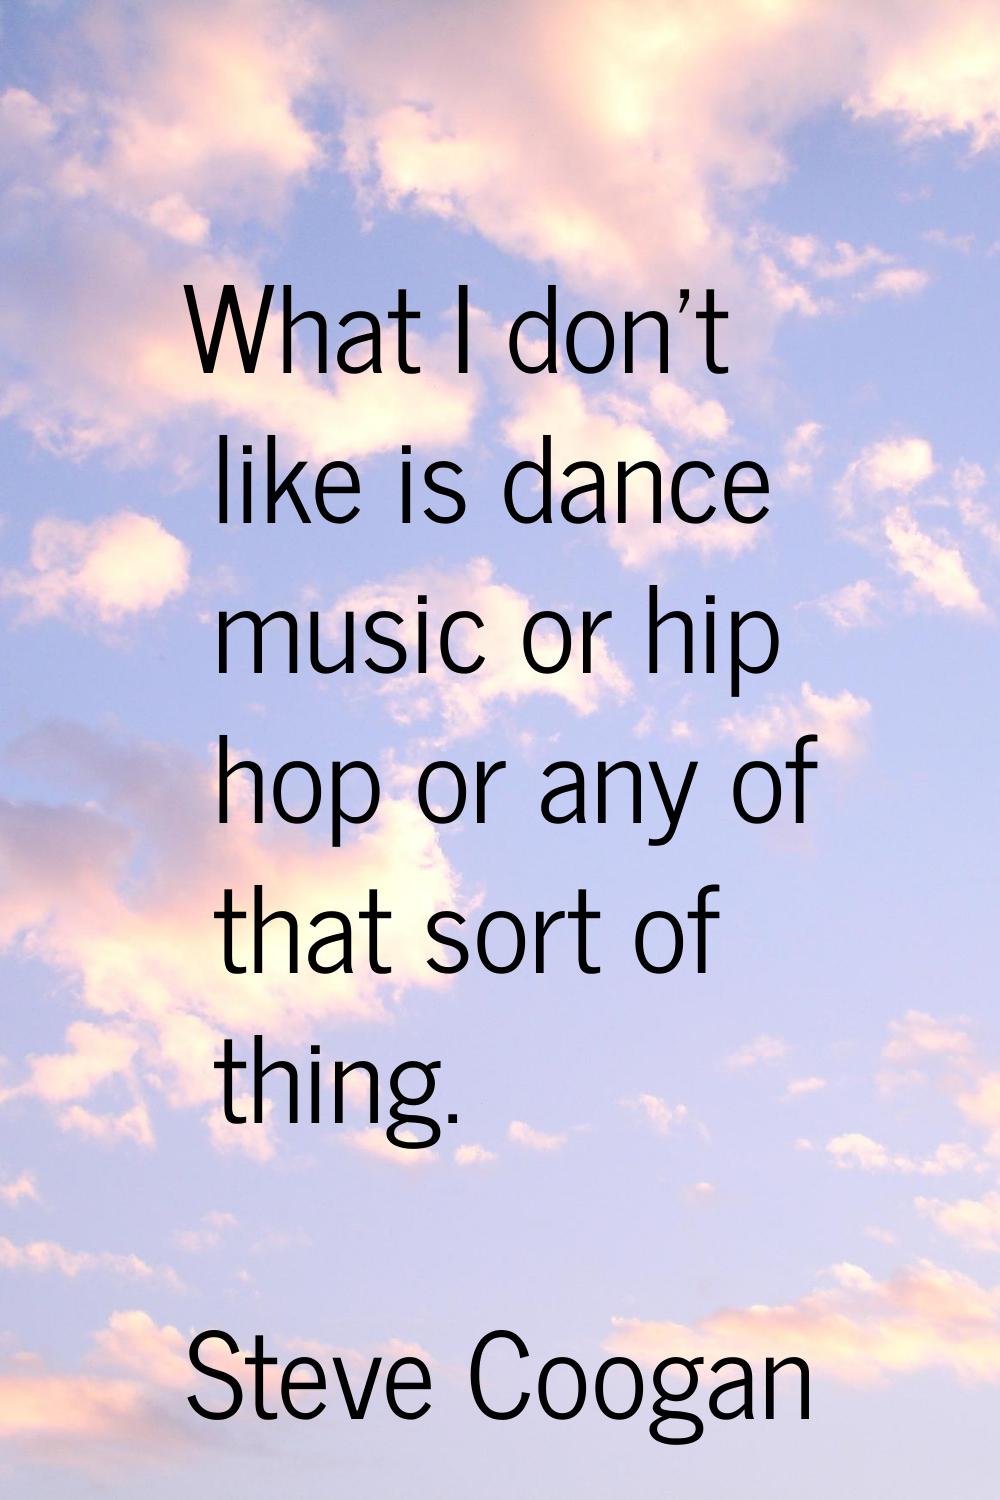 What I don't like is dance music or hip hop or any of that sort of thing.